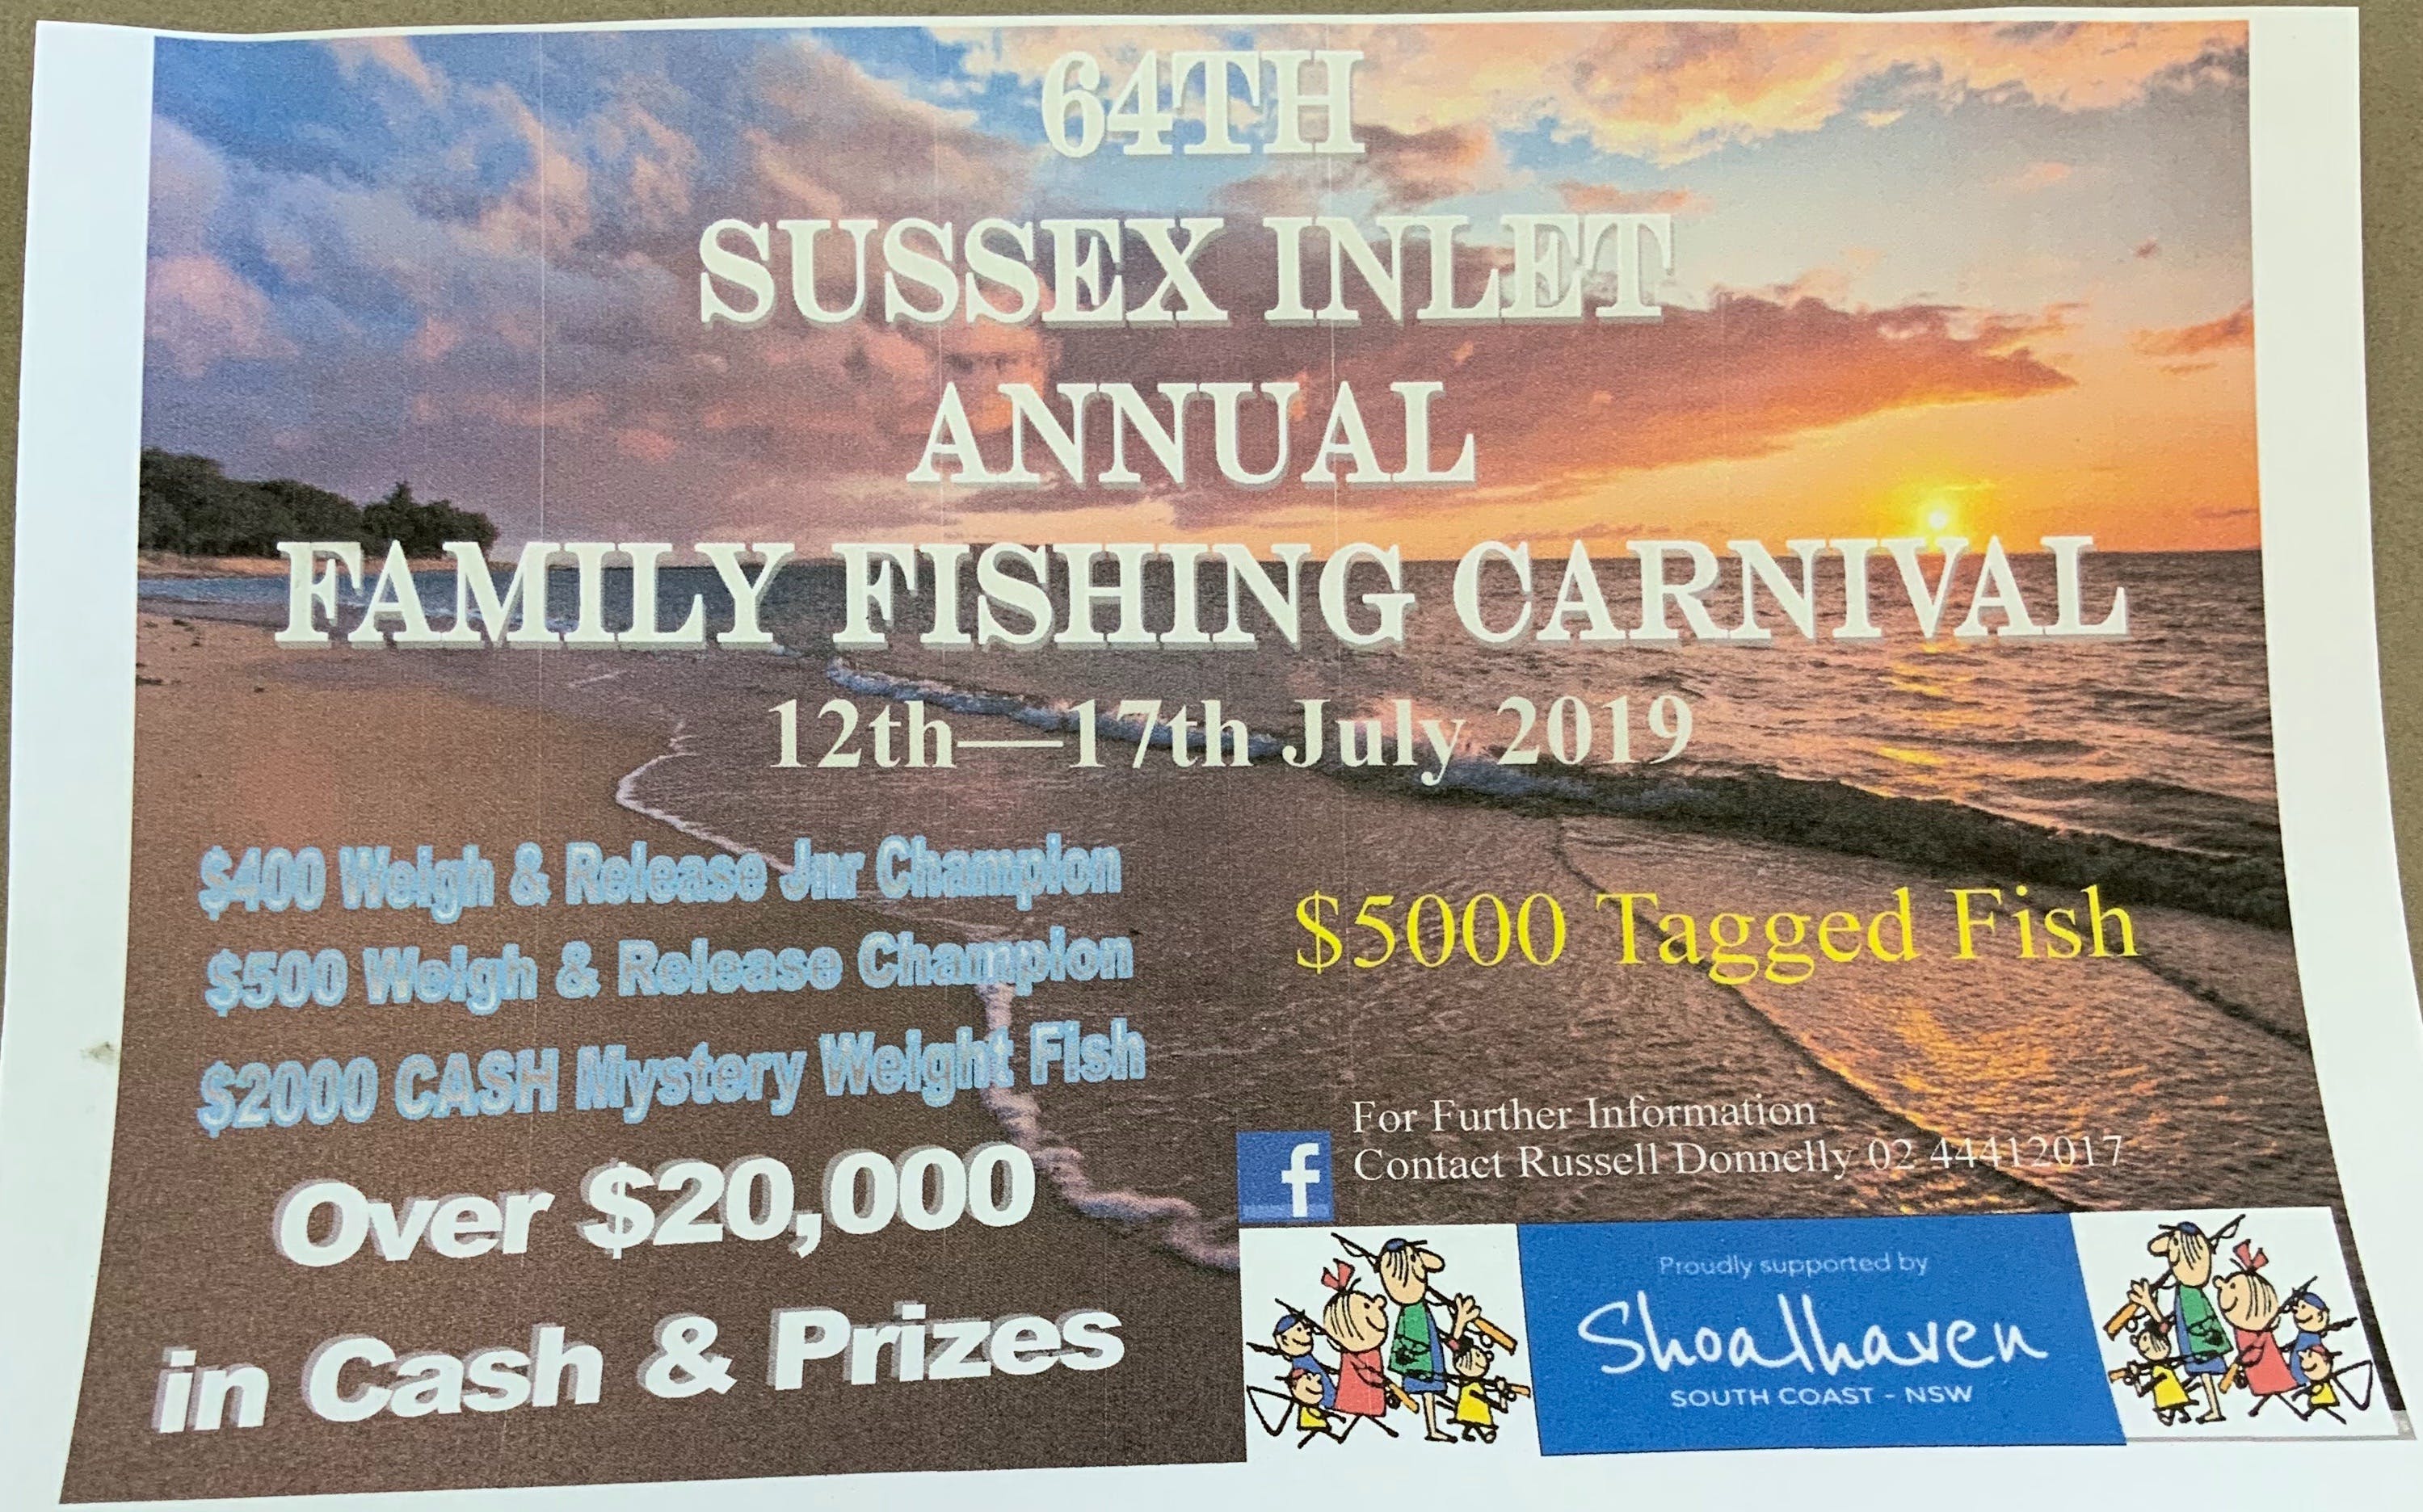 The Sussex Inlet Annual Family Fishing Carnival - Yamba Accommodation